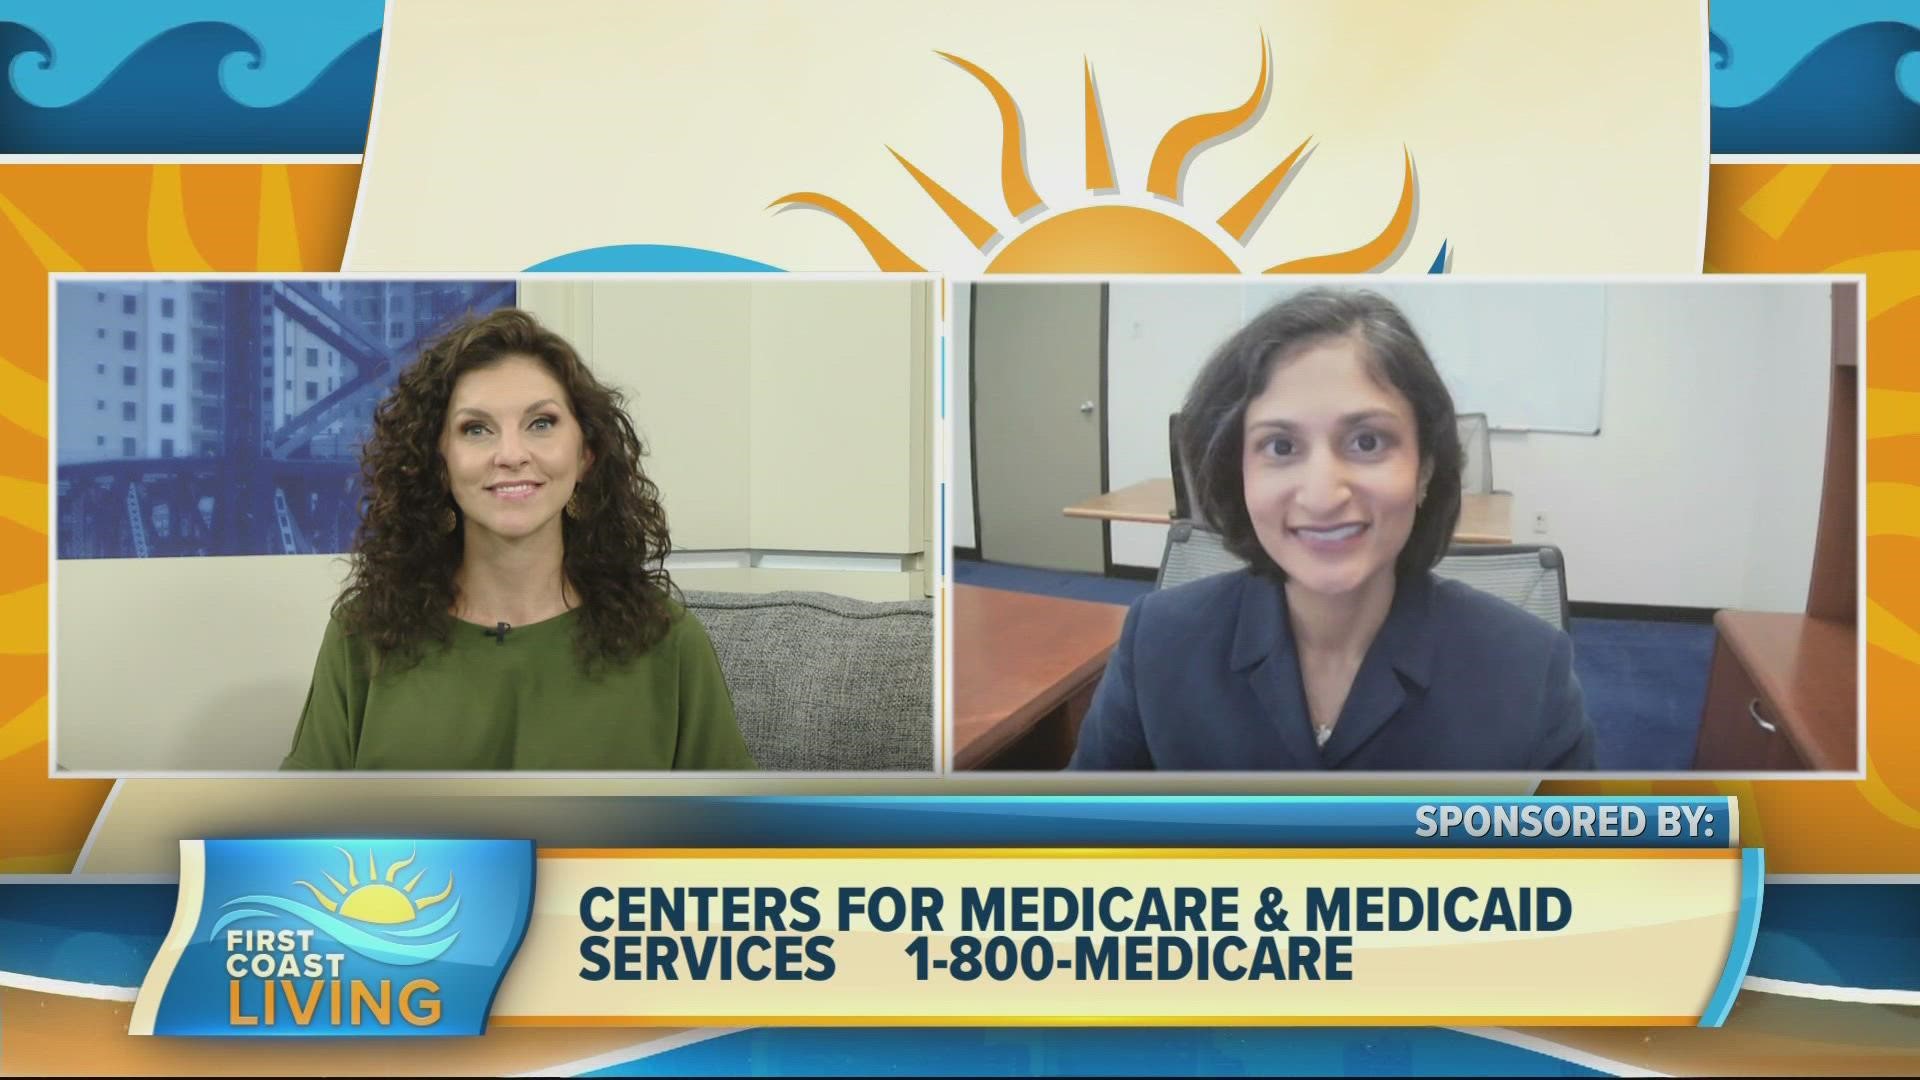 Director for The Centers for Medicare & Medicaid Services, Dr. Meena Seshamani shares the importance of comparing plans during open enrollment.